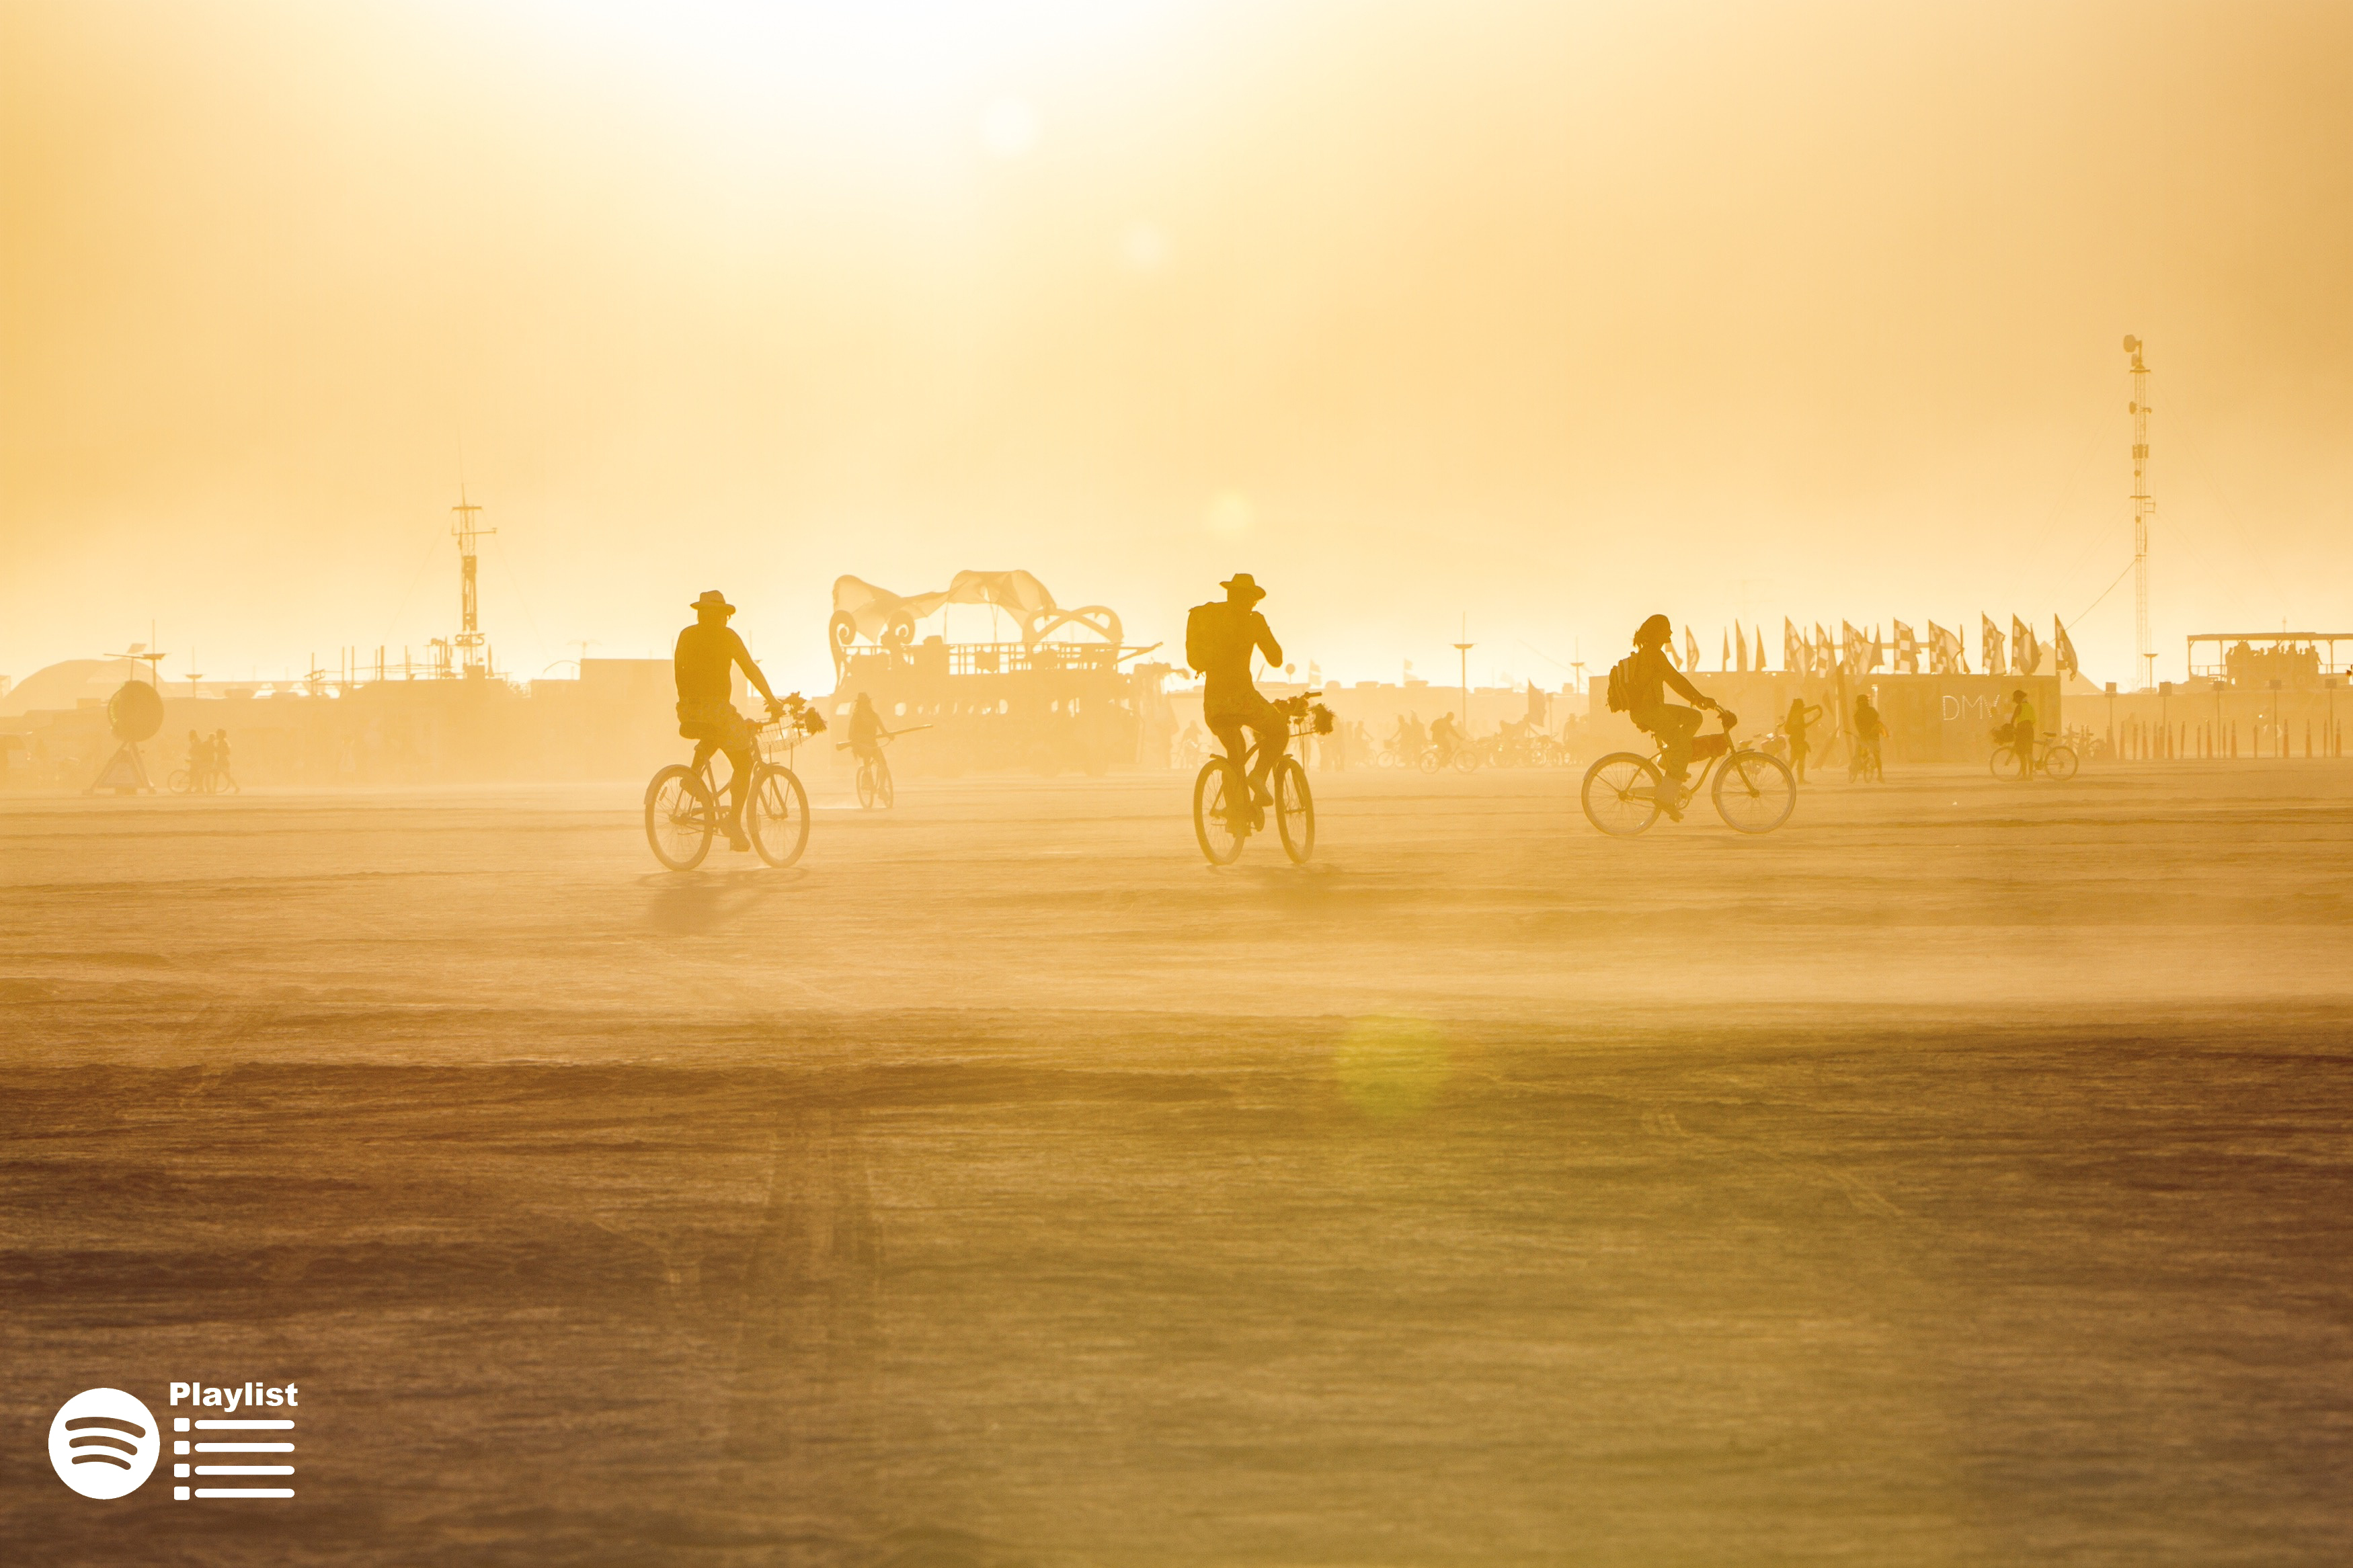 A scene from Burning Man with friends riding bicycles through the desert